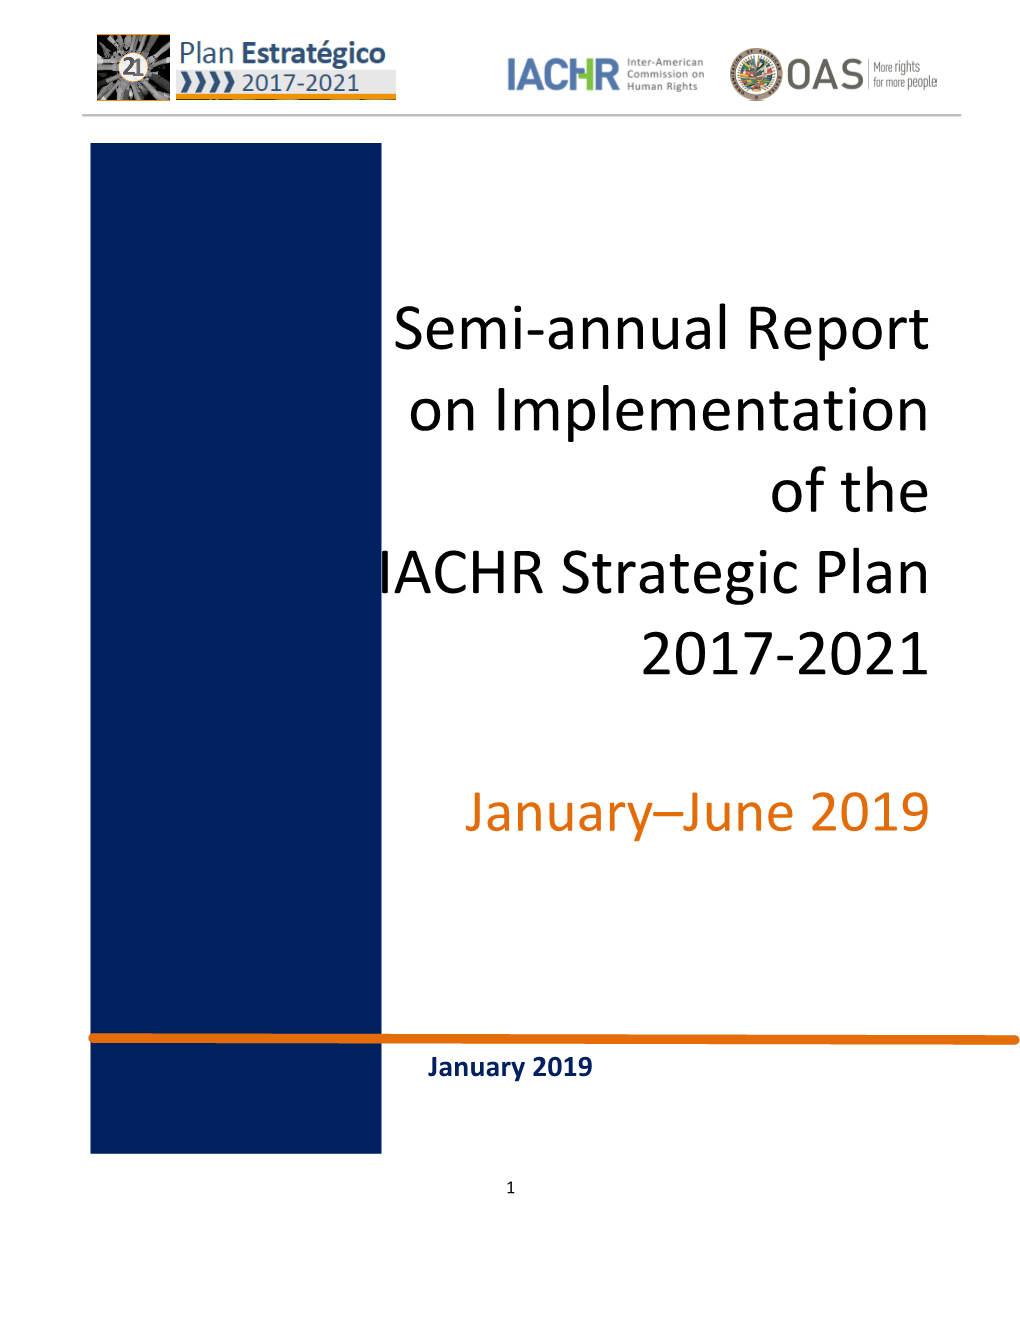 Semi-Annual Report on Implementation of the IACHR